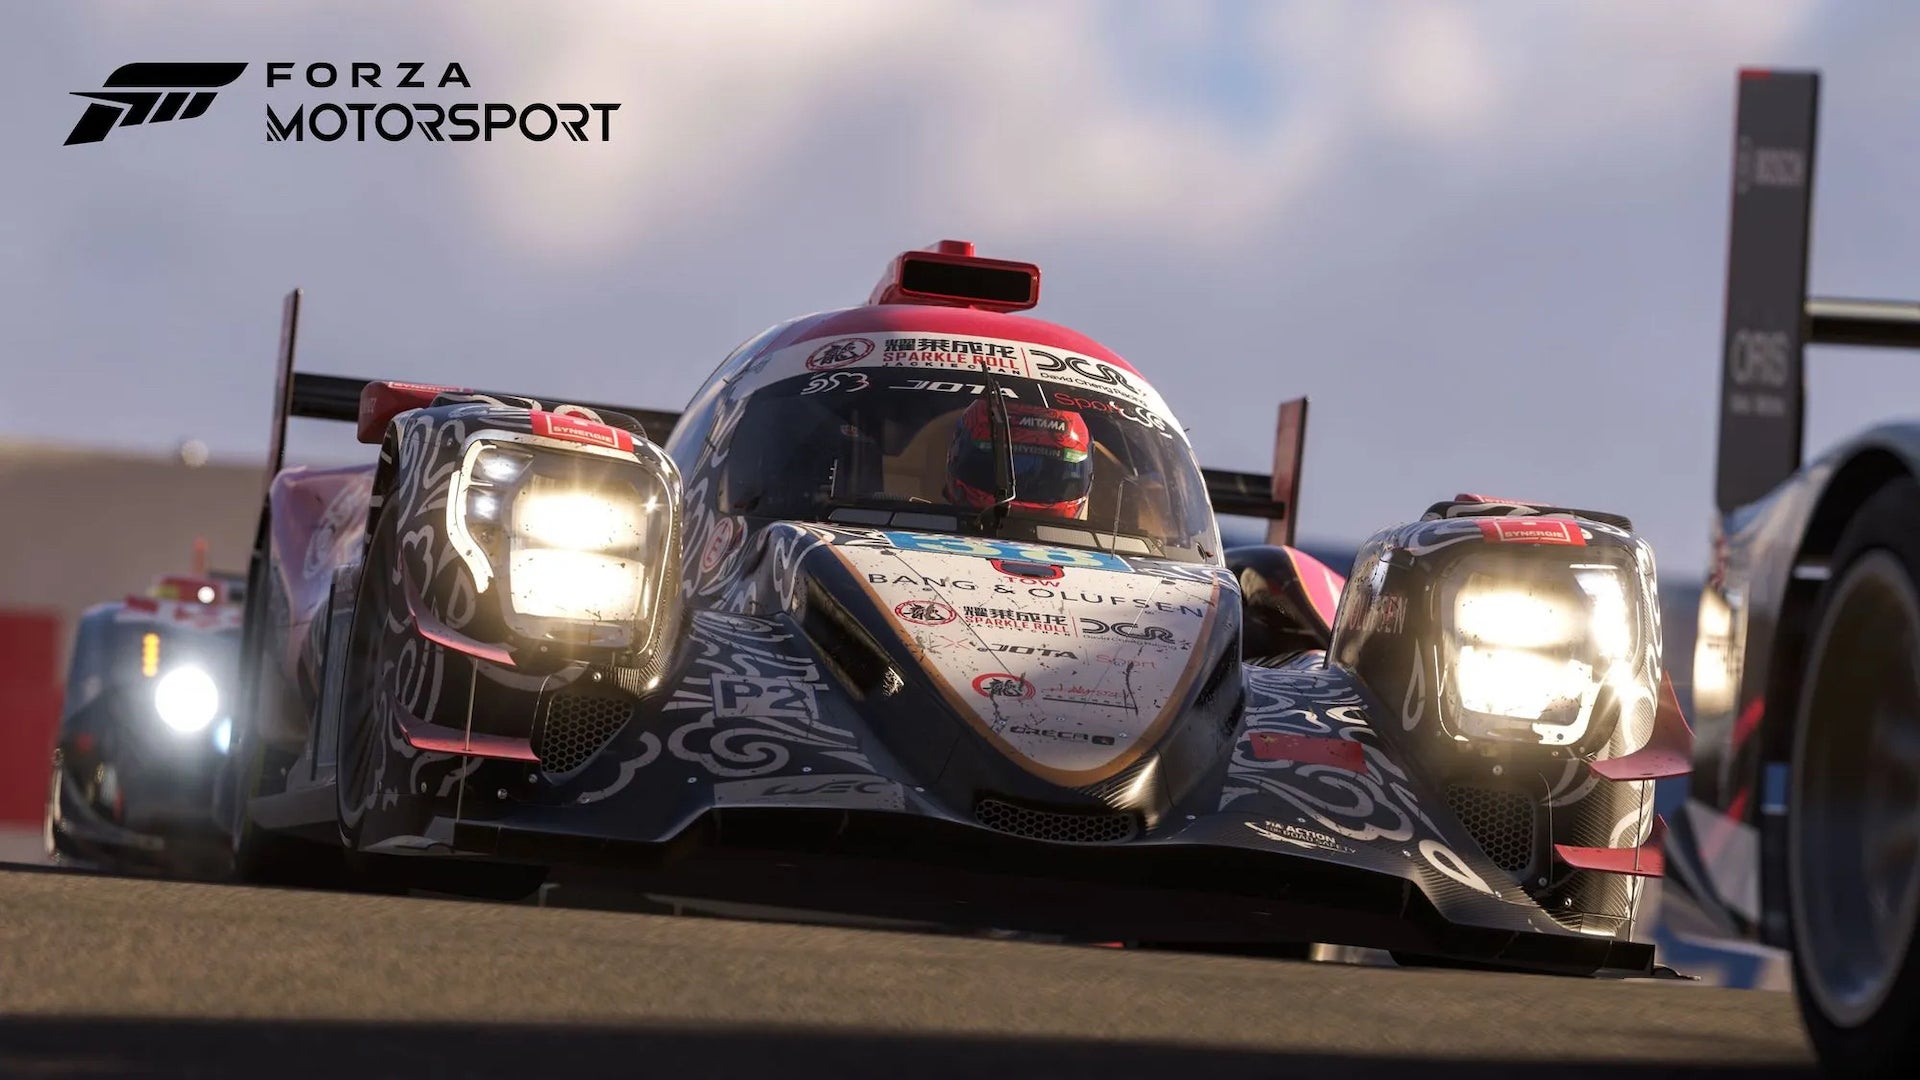 Forza Motorsport: Features, game engine & everything we know